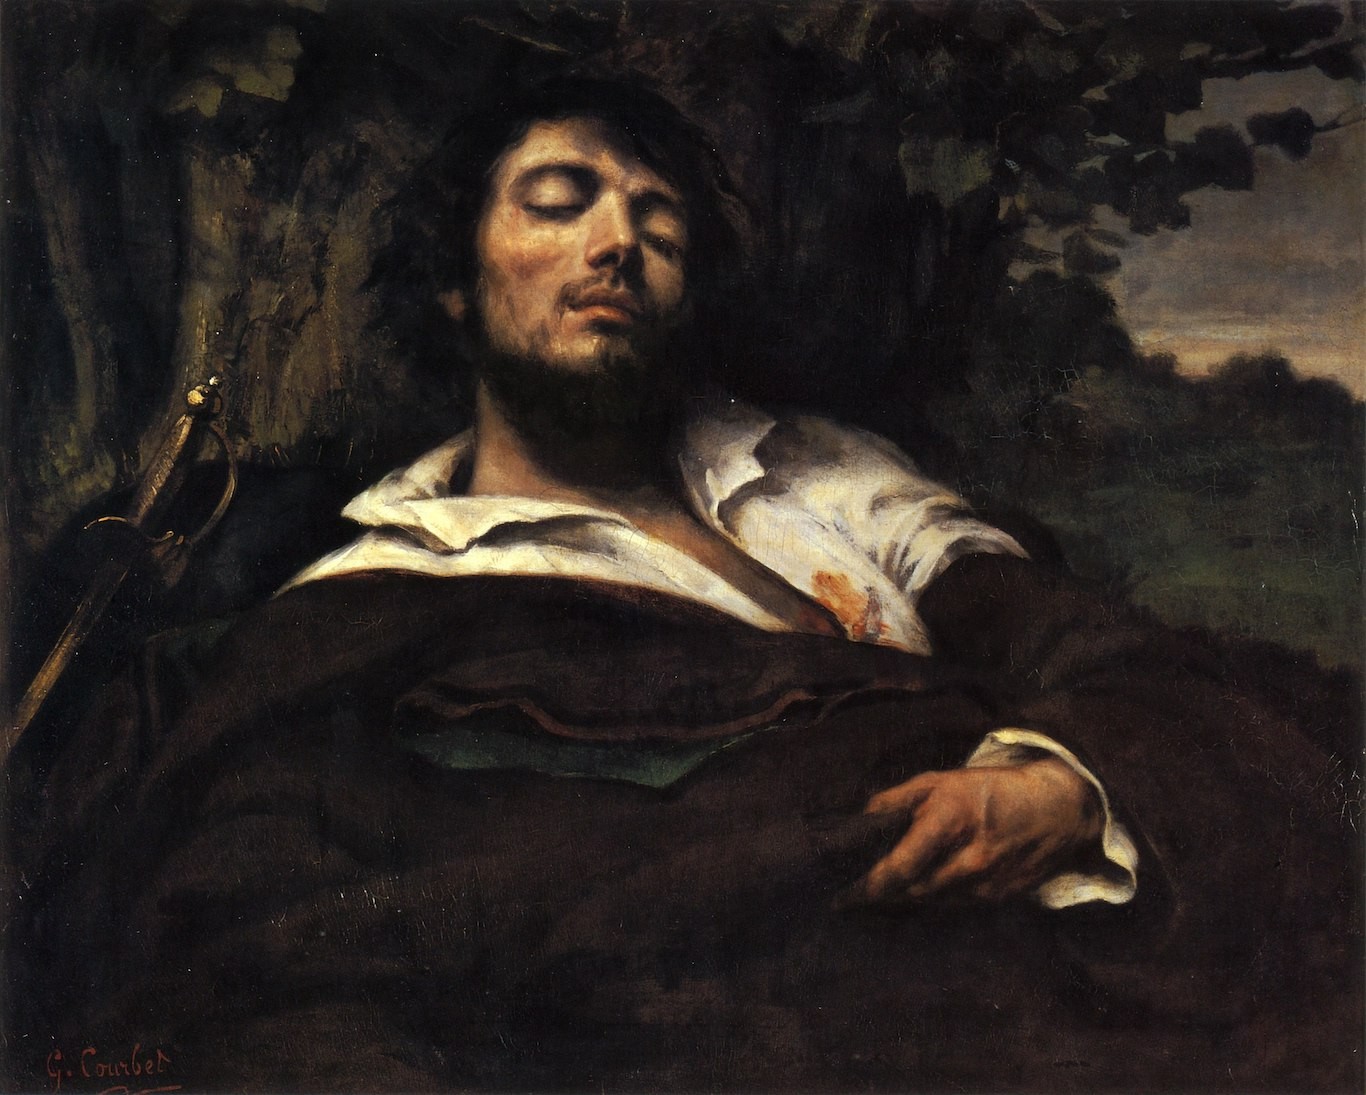 Portrait_of_the_Artist_called_The_Wounded_Man_Lhomme_blessé_by_Gustave_Courbet.jpg